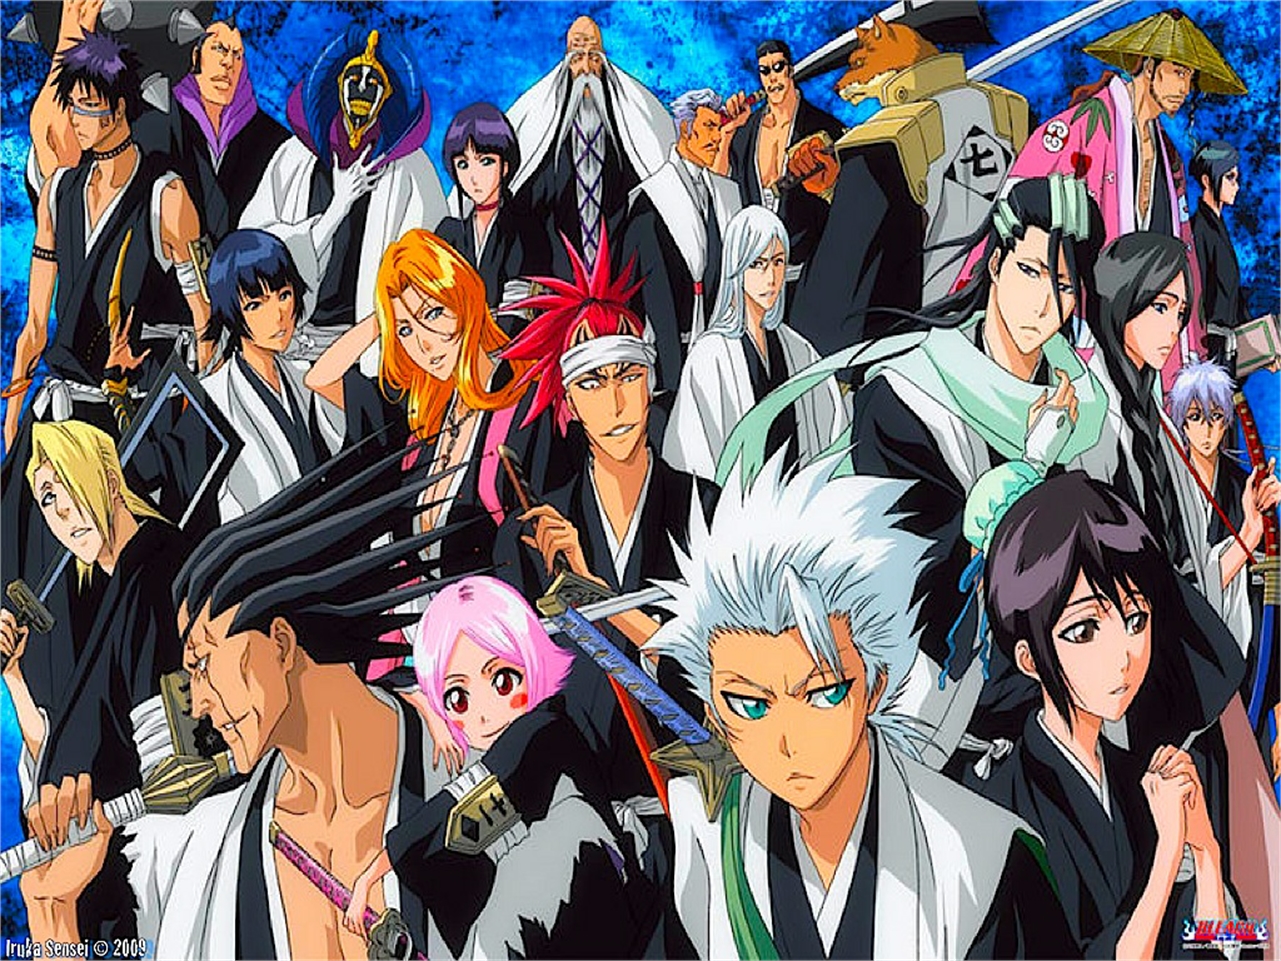 Bleach Image - ID: 447579 - Image Abyss.